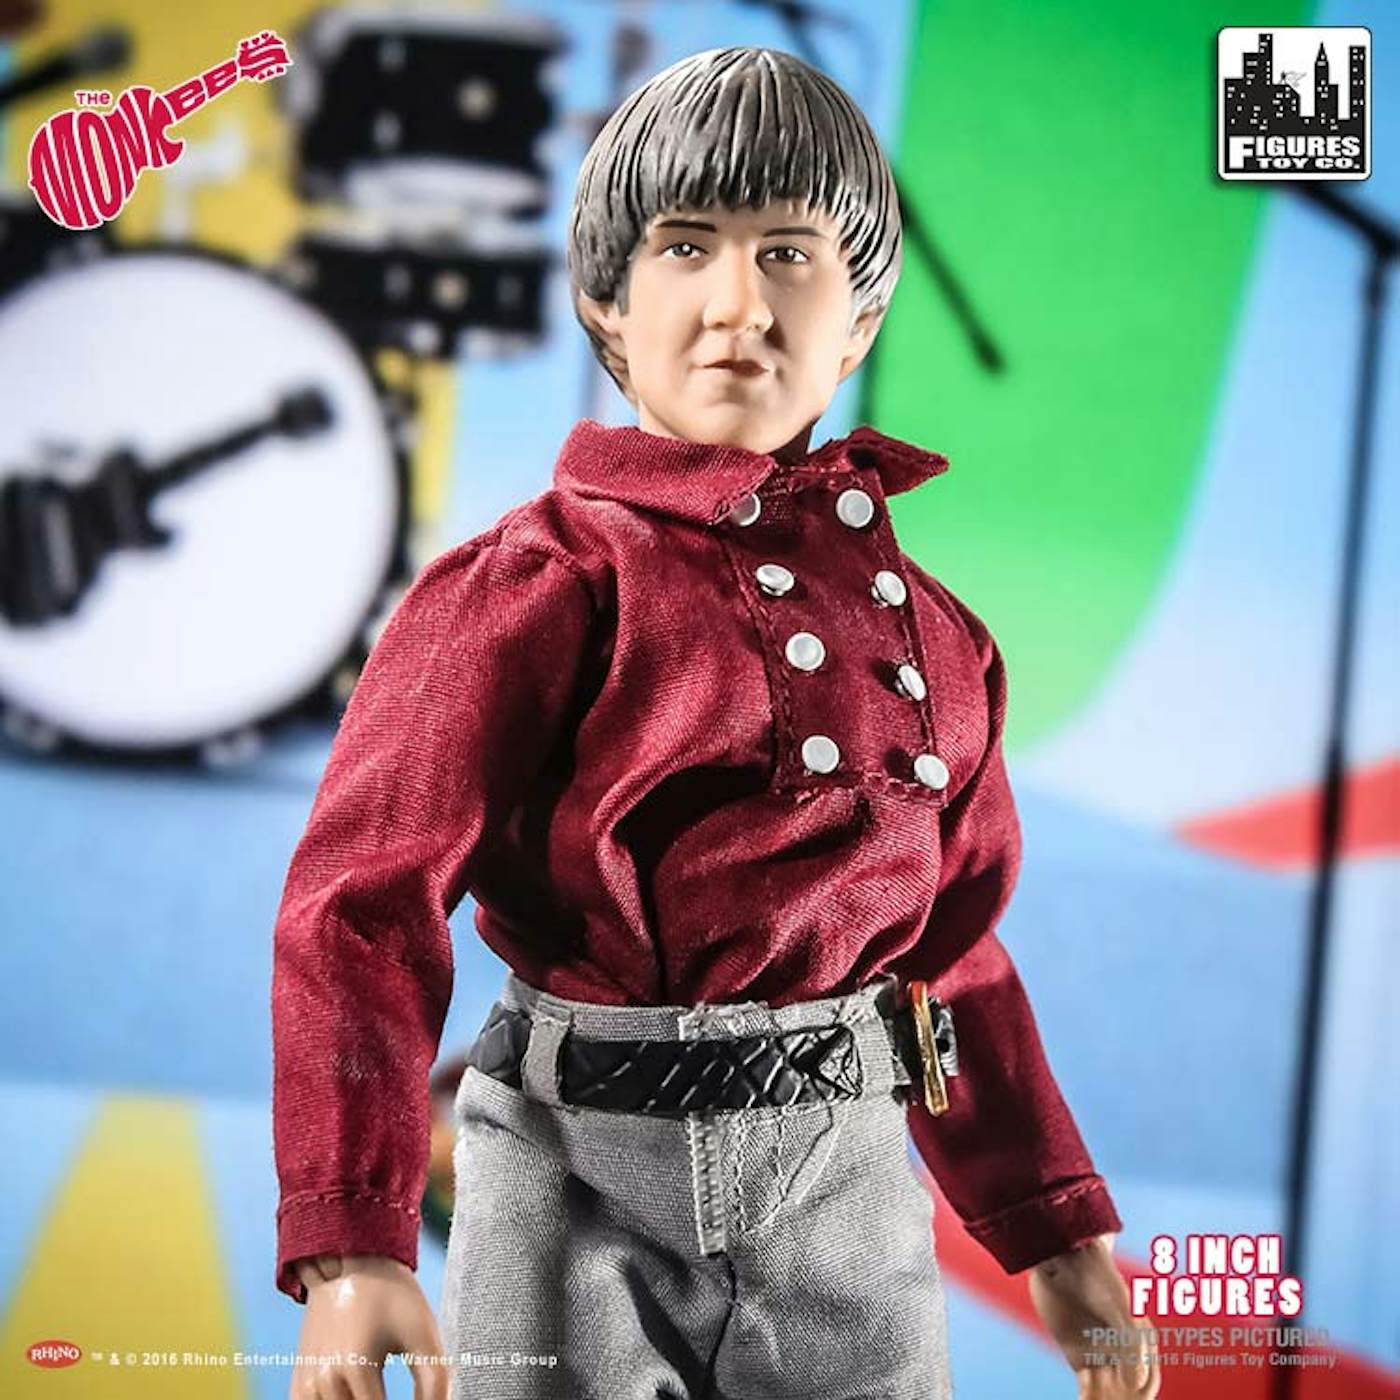 The Monkees Peter Tork 8" Action Figure